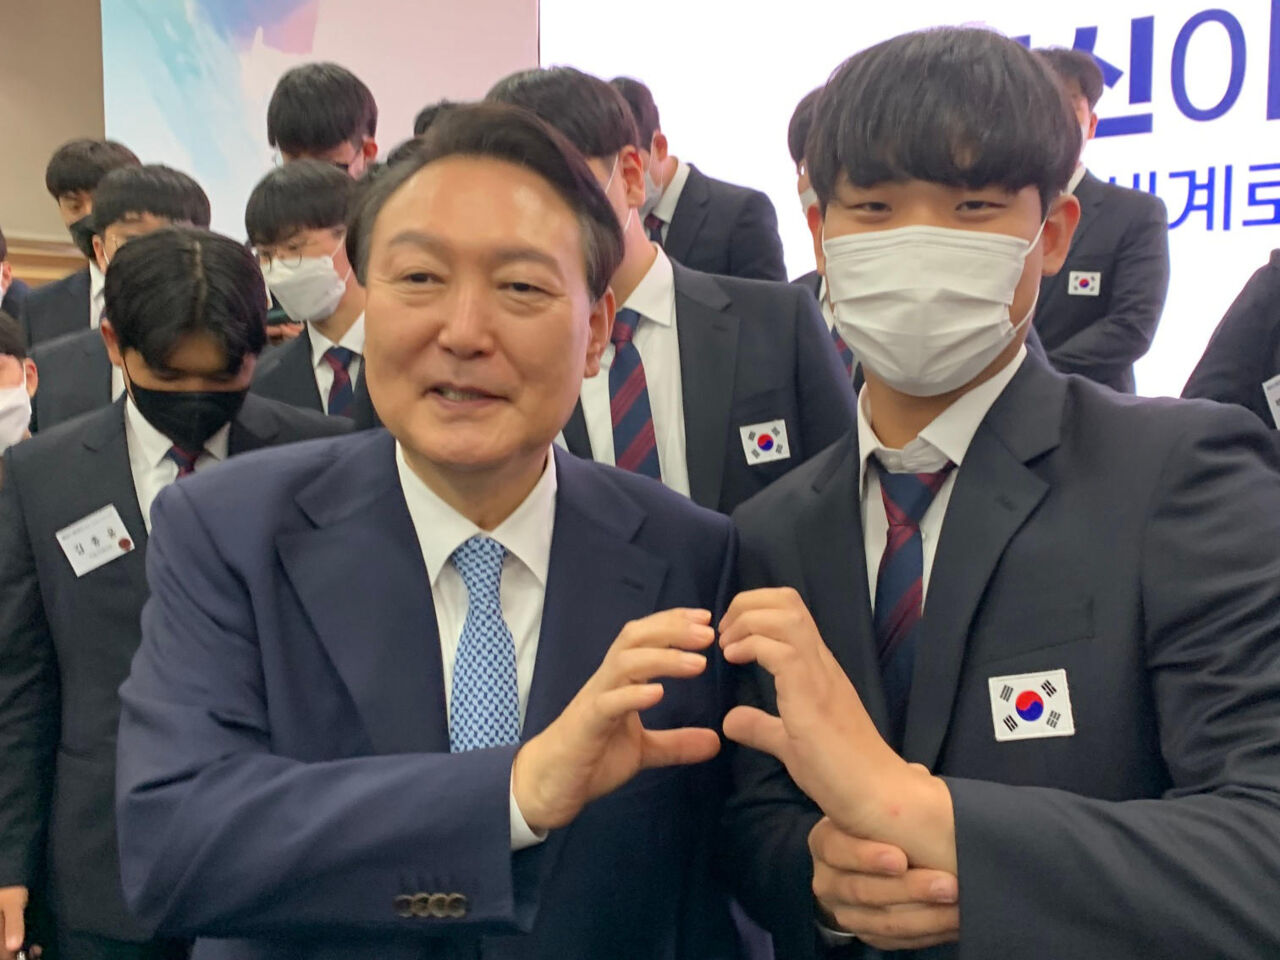 President of Korea meets Competitors ahead of WorldSkills Competition 2022 Special Edition